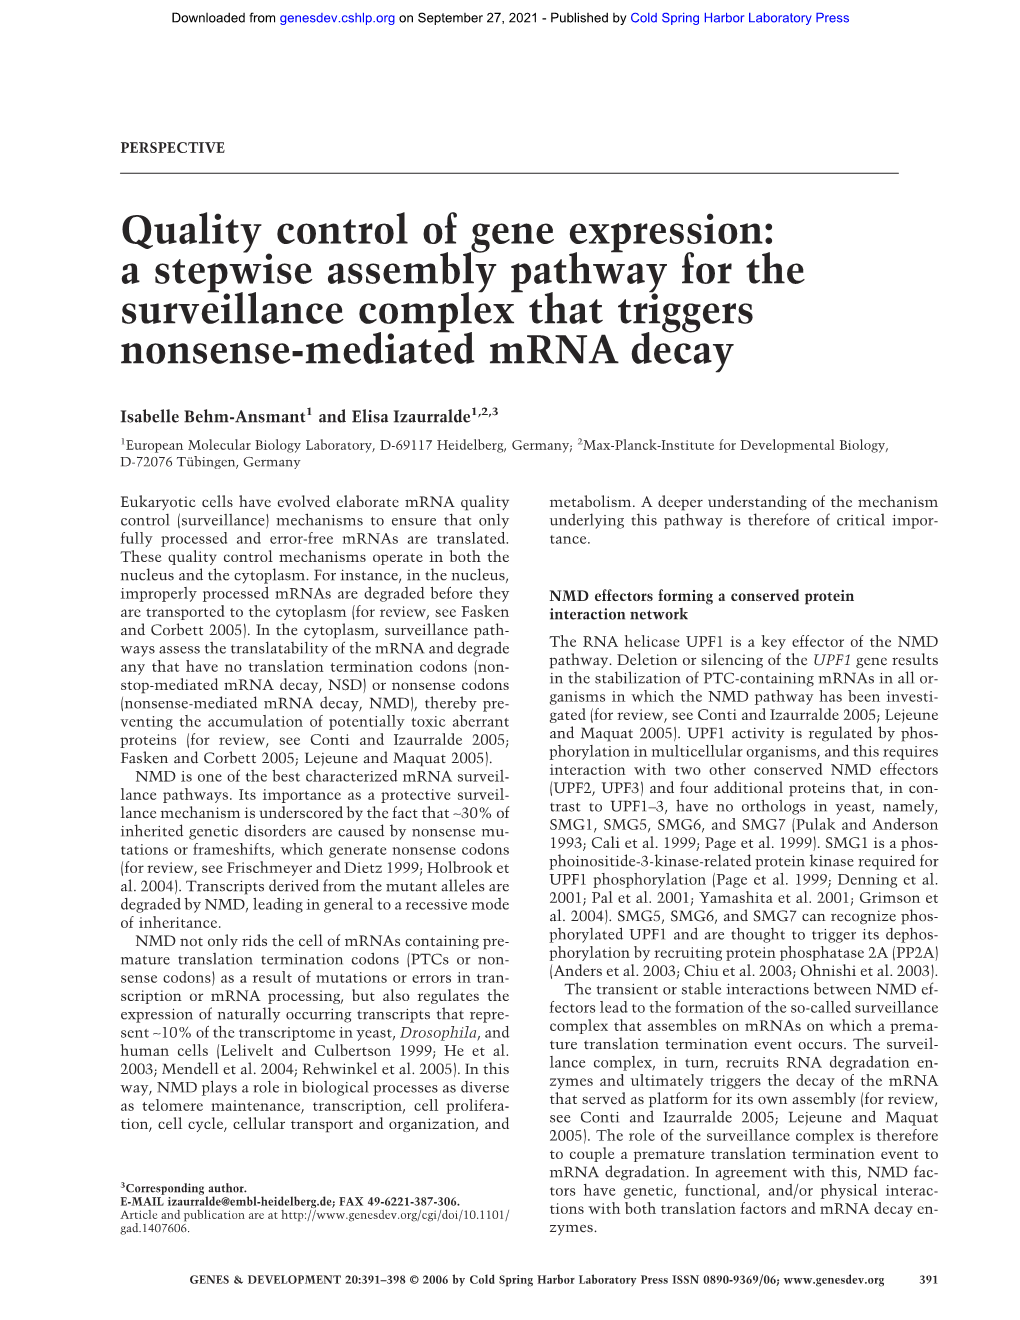 Quality Control of Gene Expression: a Stepwise Assembly Pathway for the Surveillance Complex That Triggers Nonsense-Mediated Mrna Decay